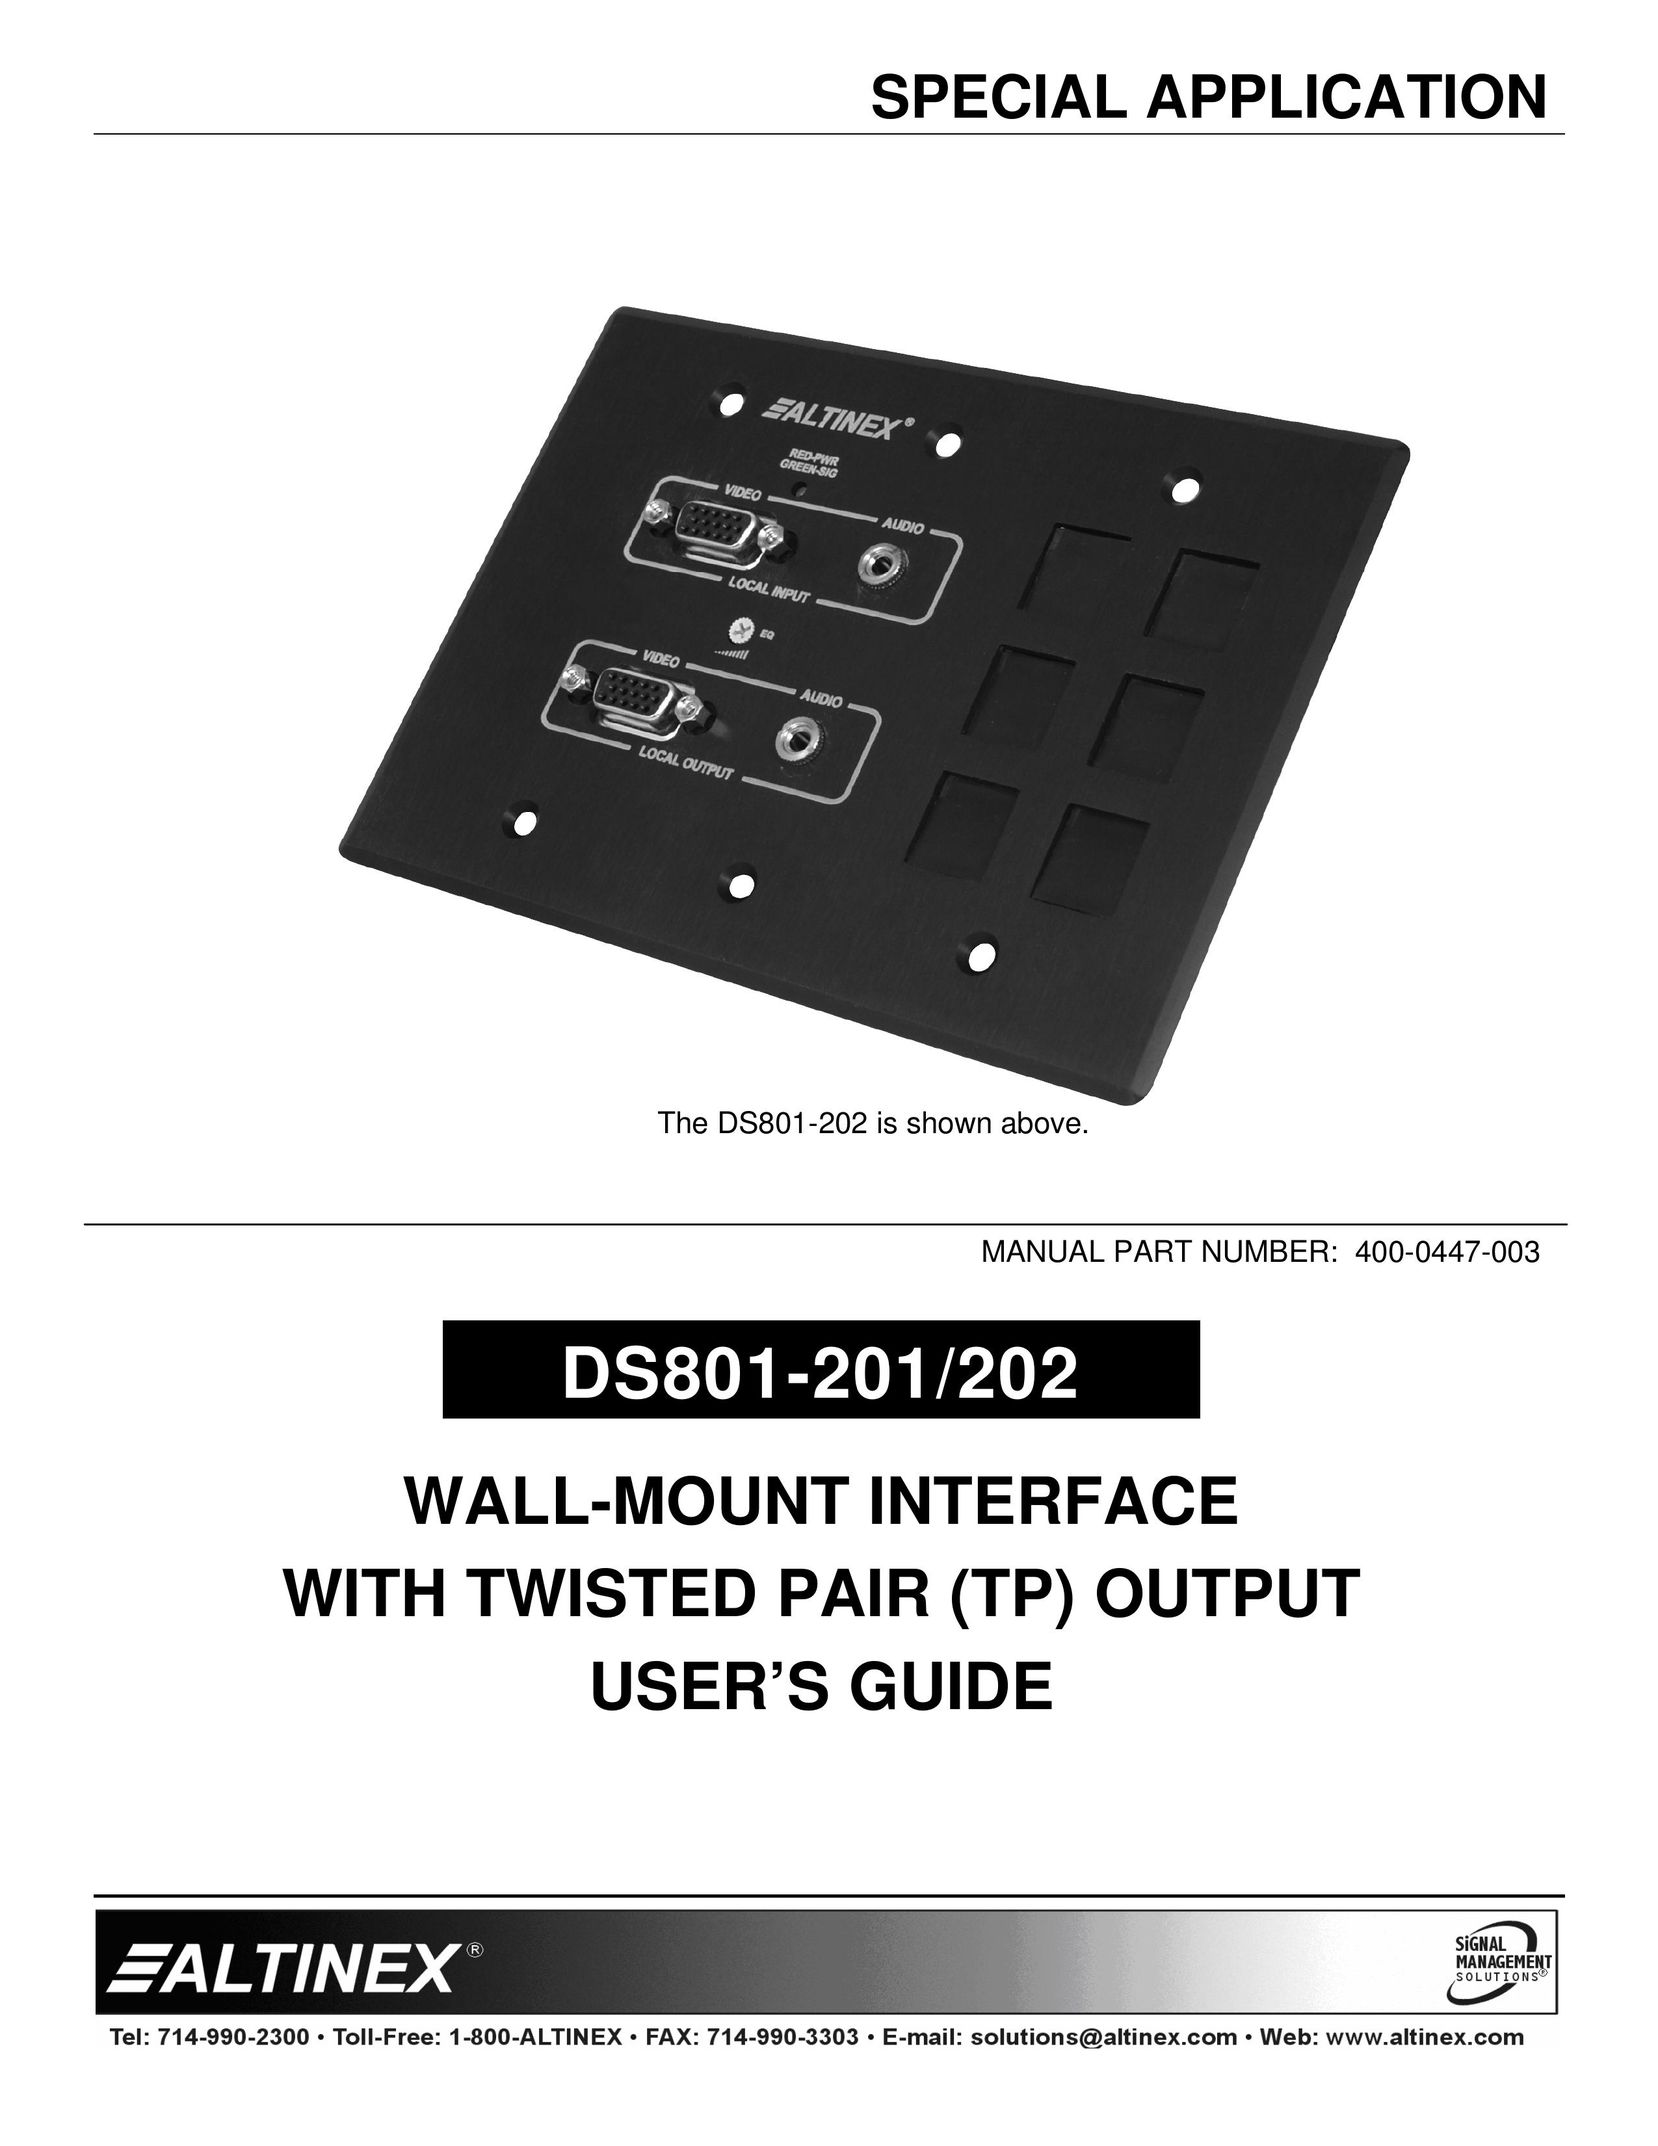 Altinex DS801-201 Network Card User Manual (Page 1)